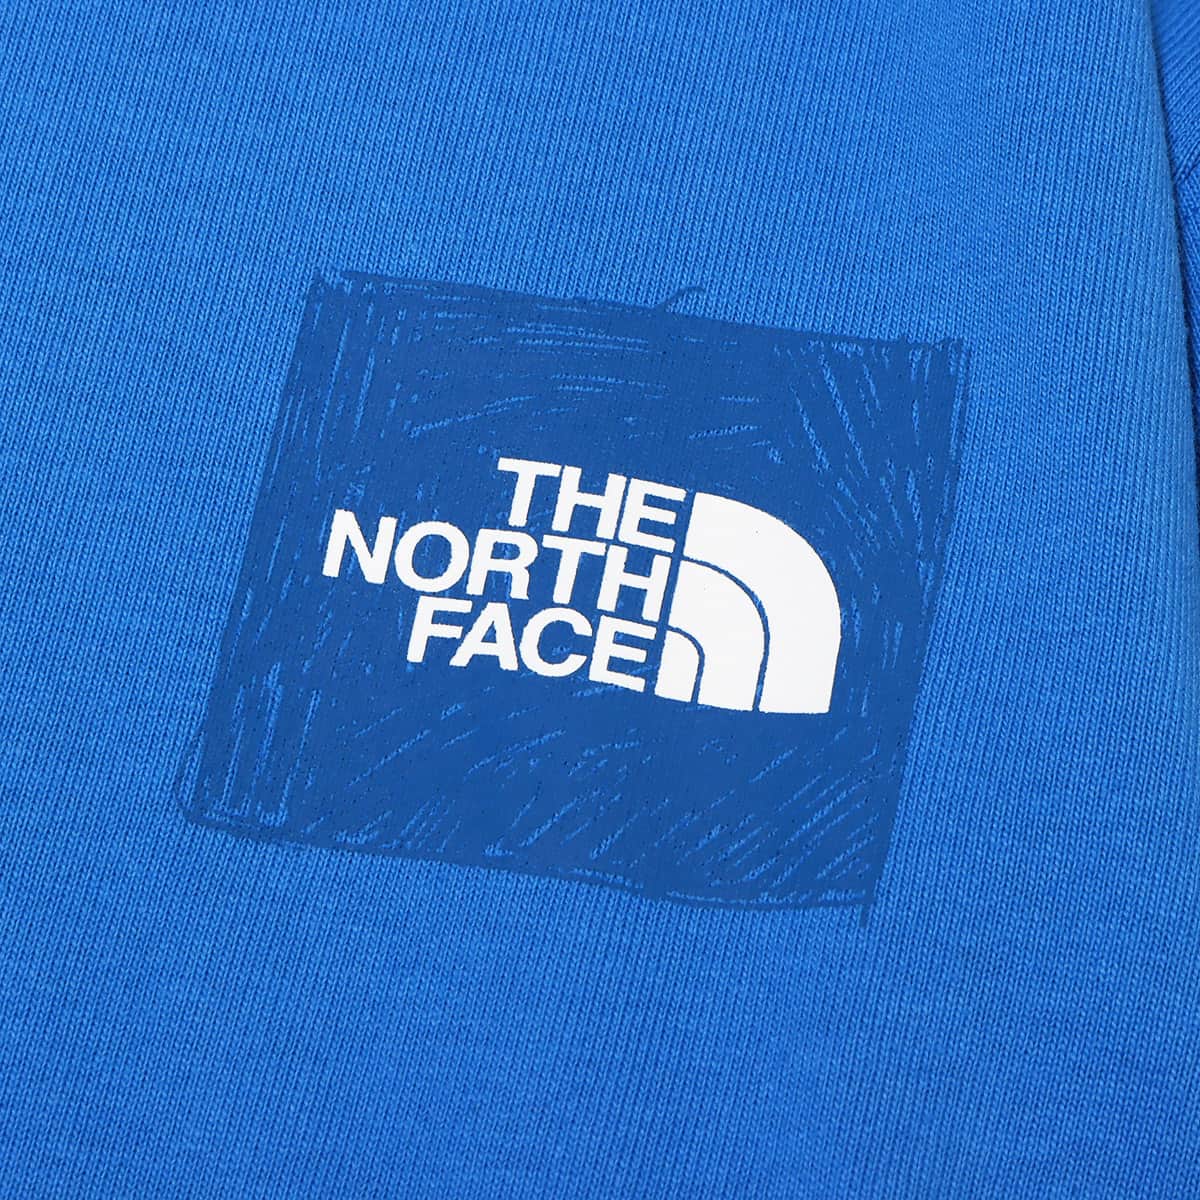 THE NORTH FACE L/S SLEEVE GRAPHIC TEE スーパーソニックブルー SS I